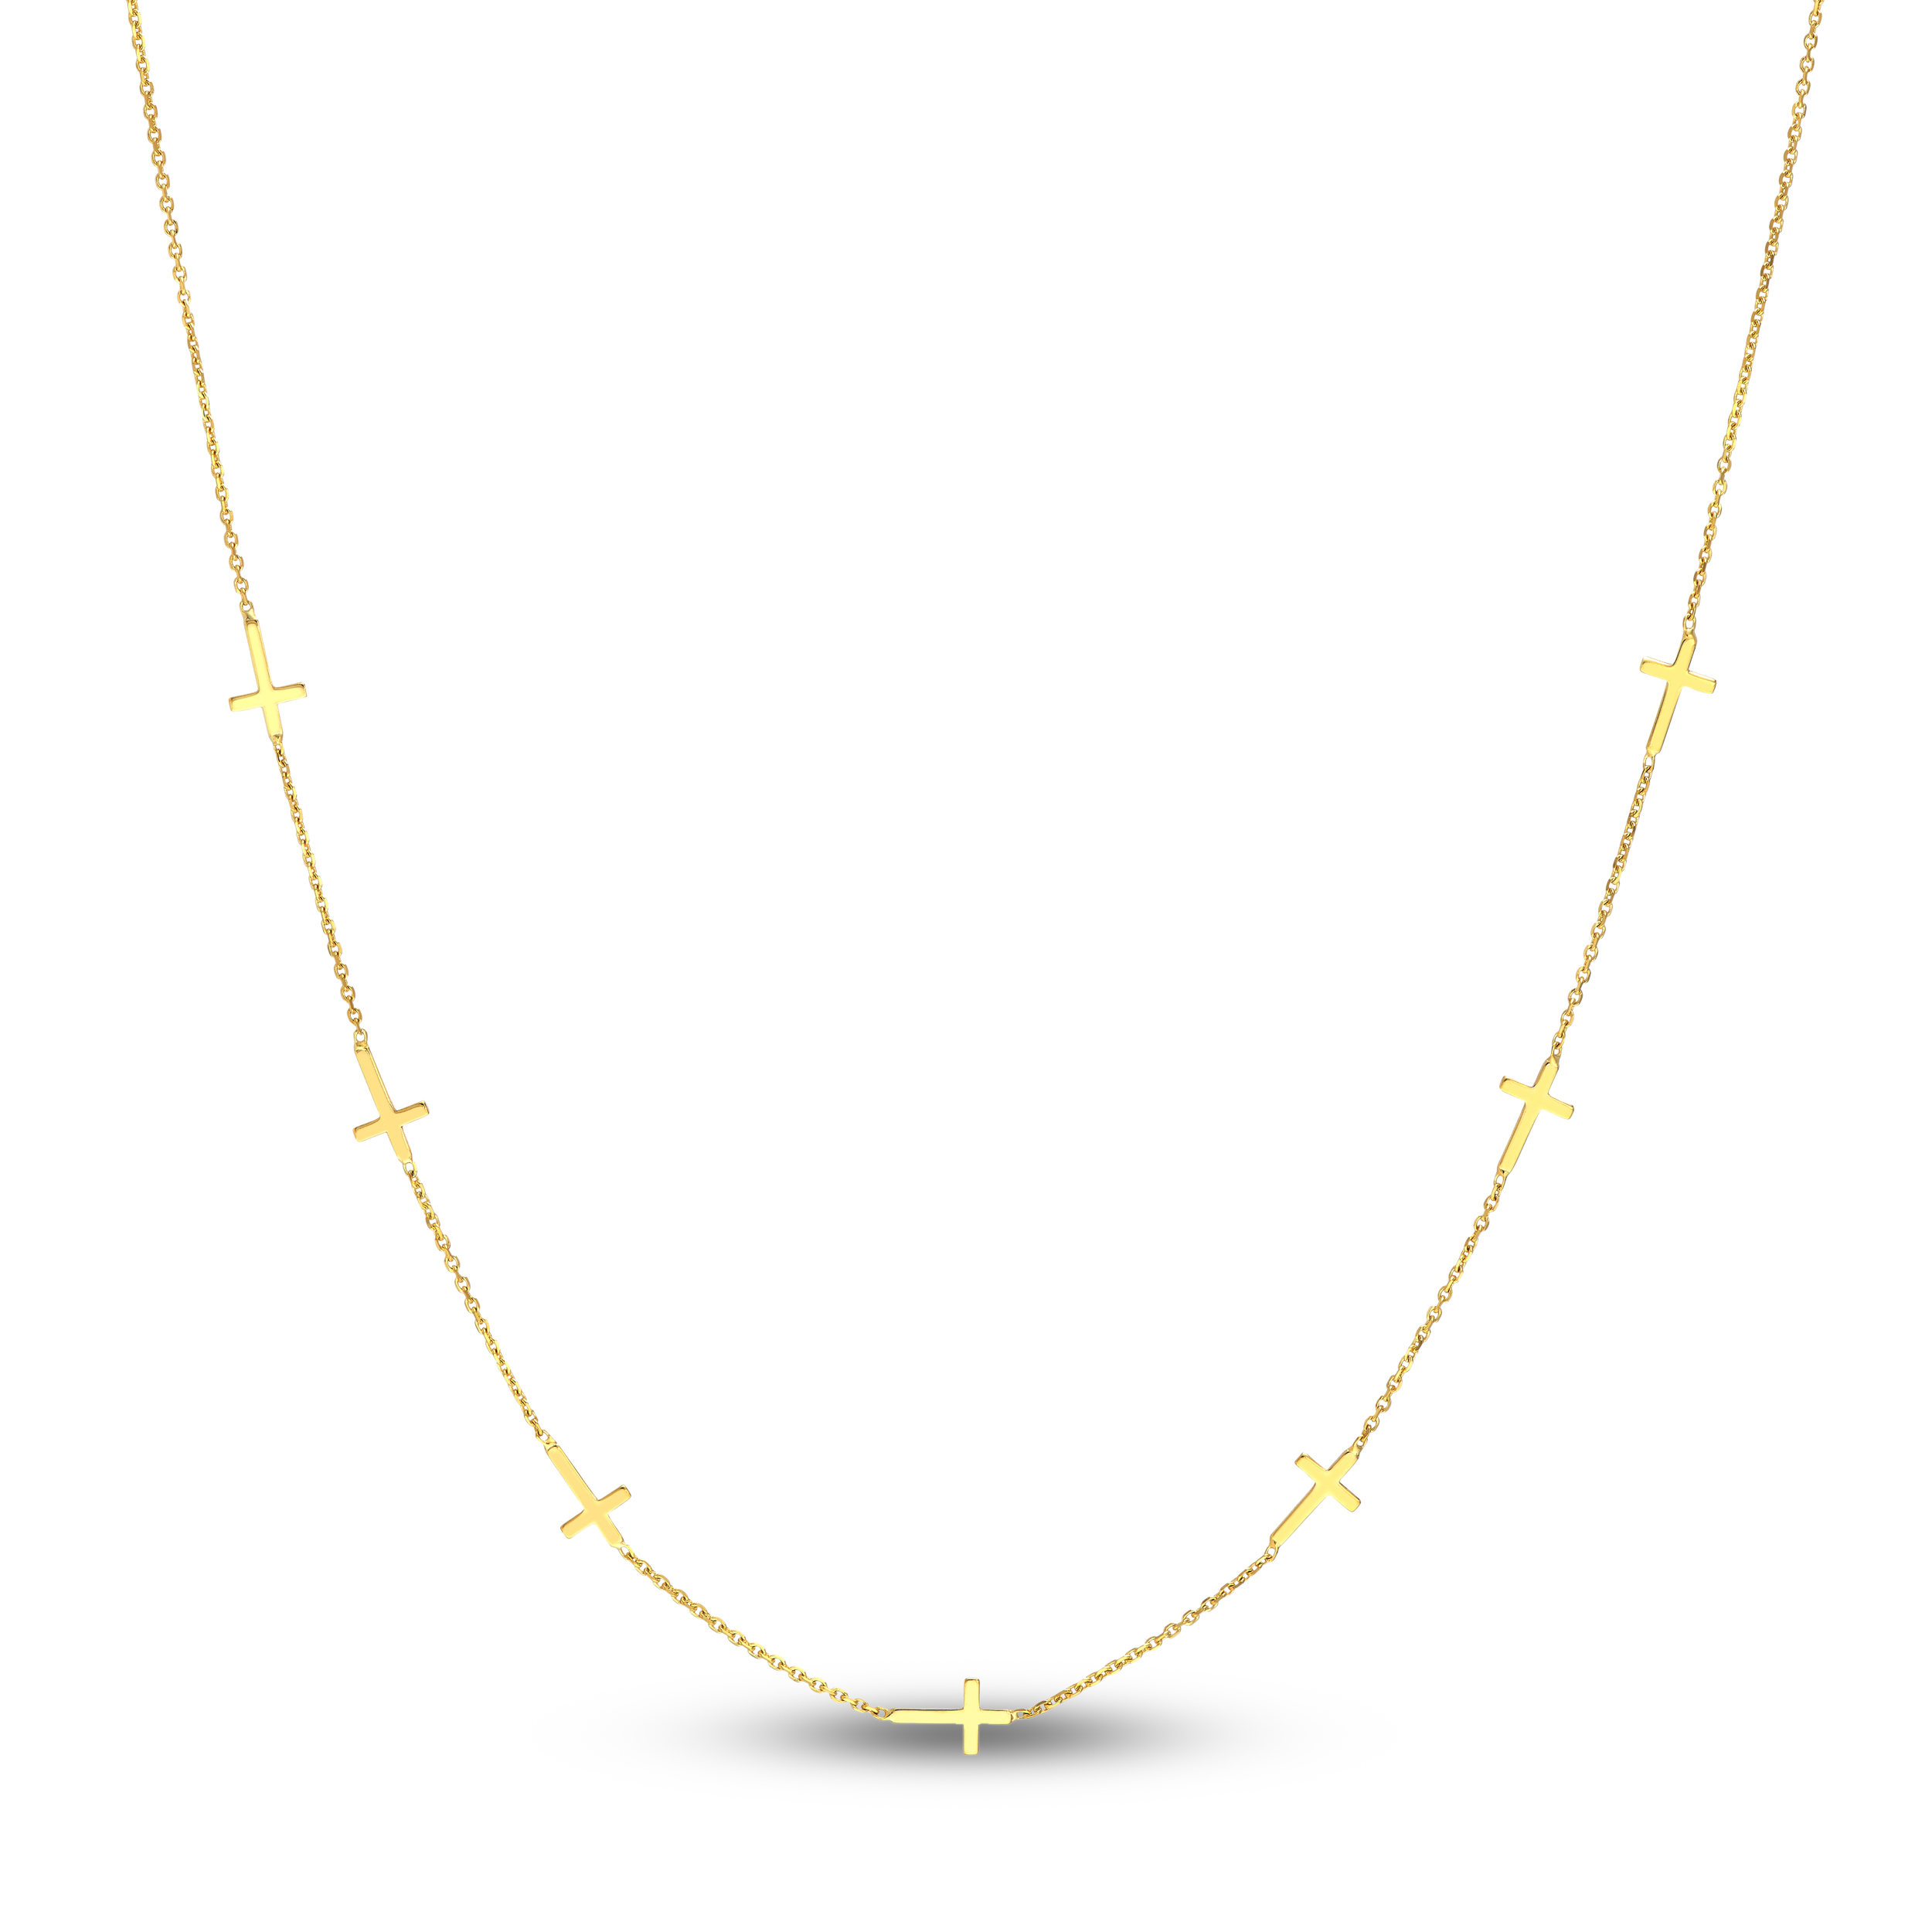 7 Cross Station Necklace 14K Yellow Gold 16" MVg3uBYj